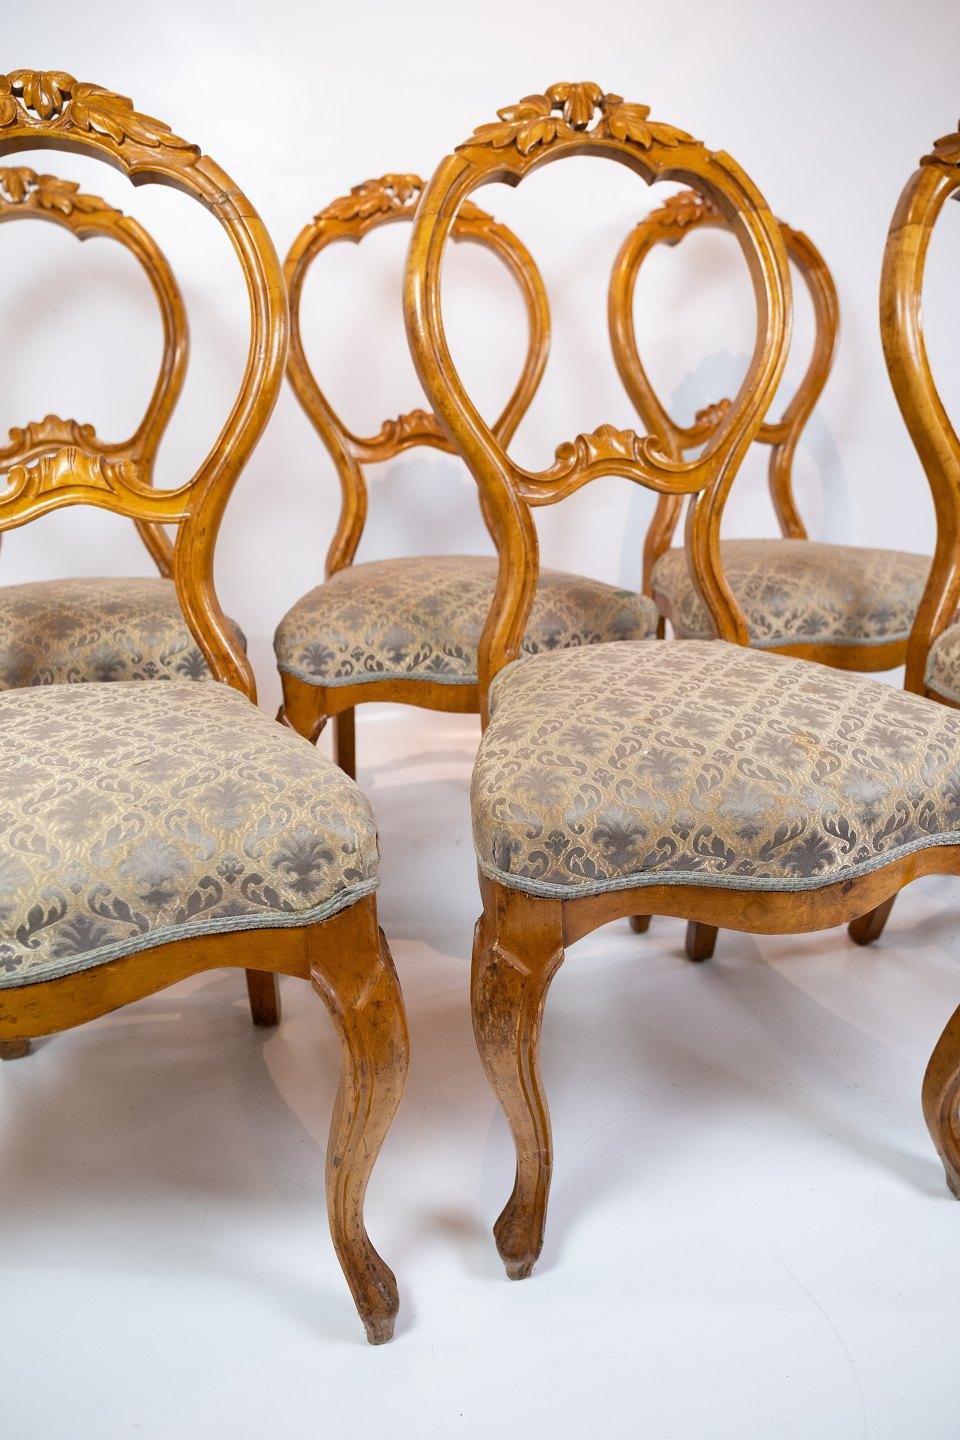 The set of six Rococo dining room chairs, crafted from light mahogany and adorned with intricately patterned fabric, harks back to the opulence and elegance of the 1760s. These chairs are exquisite examples of the Rococo style, characterized by its